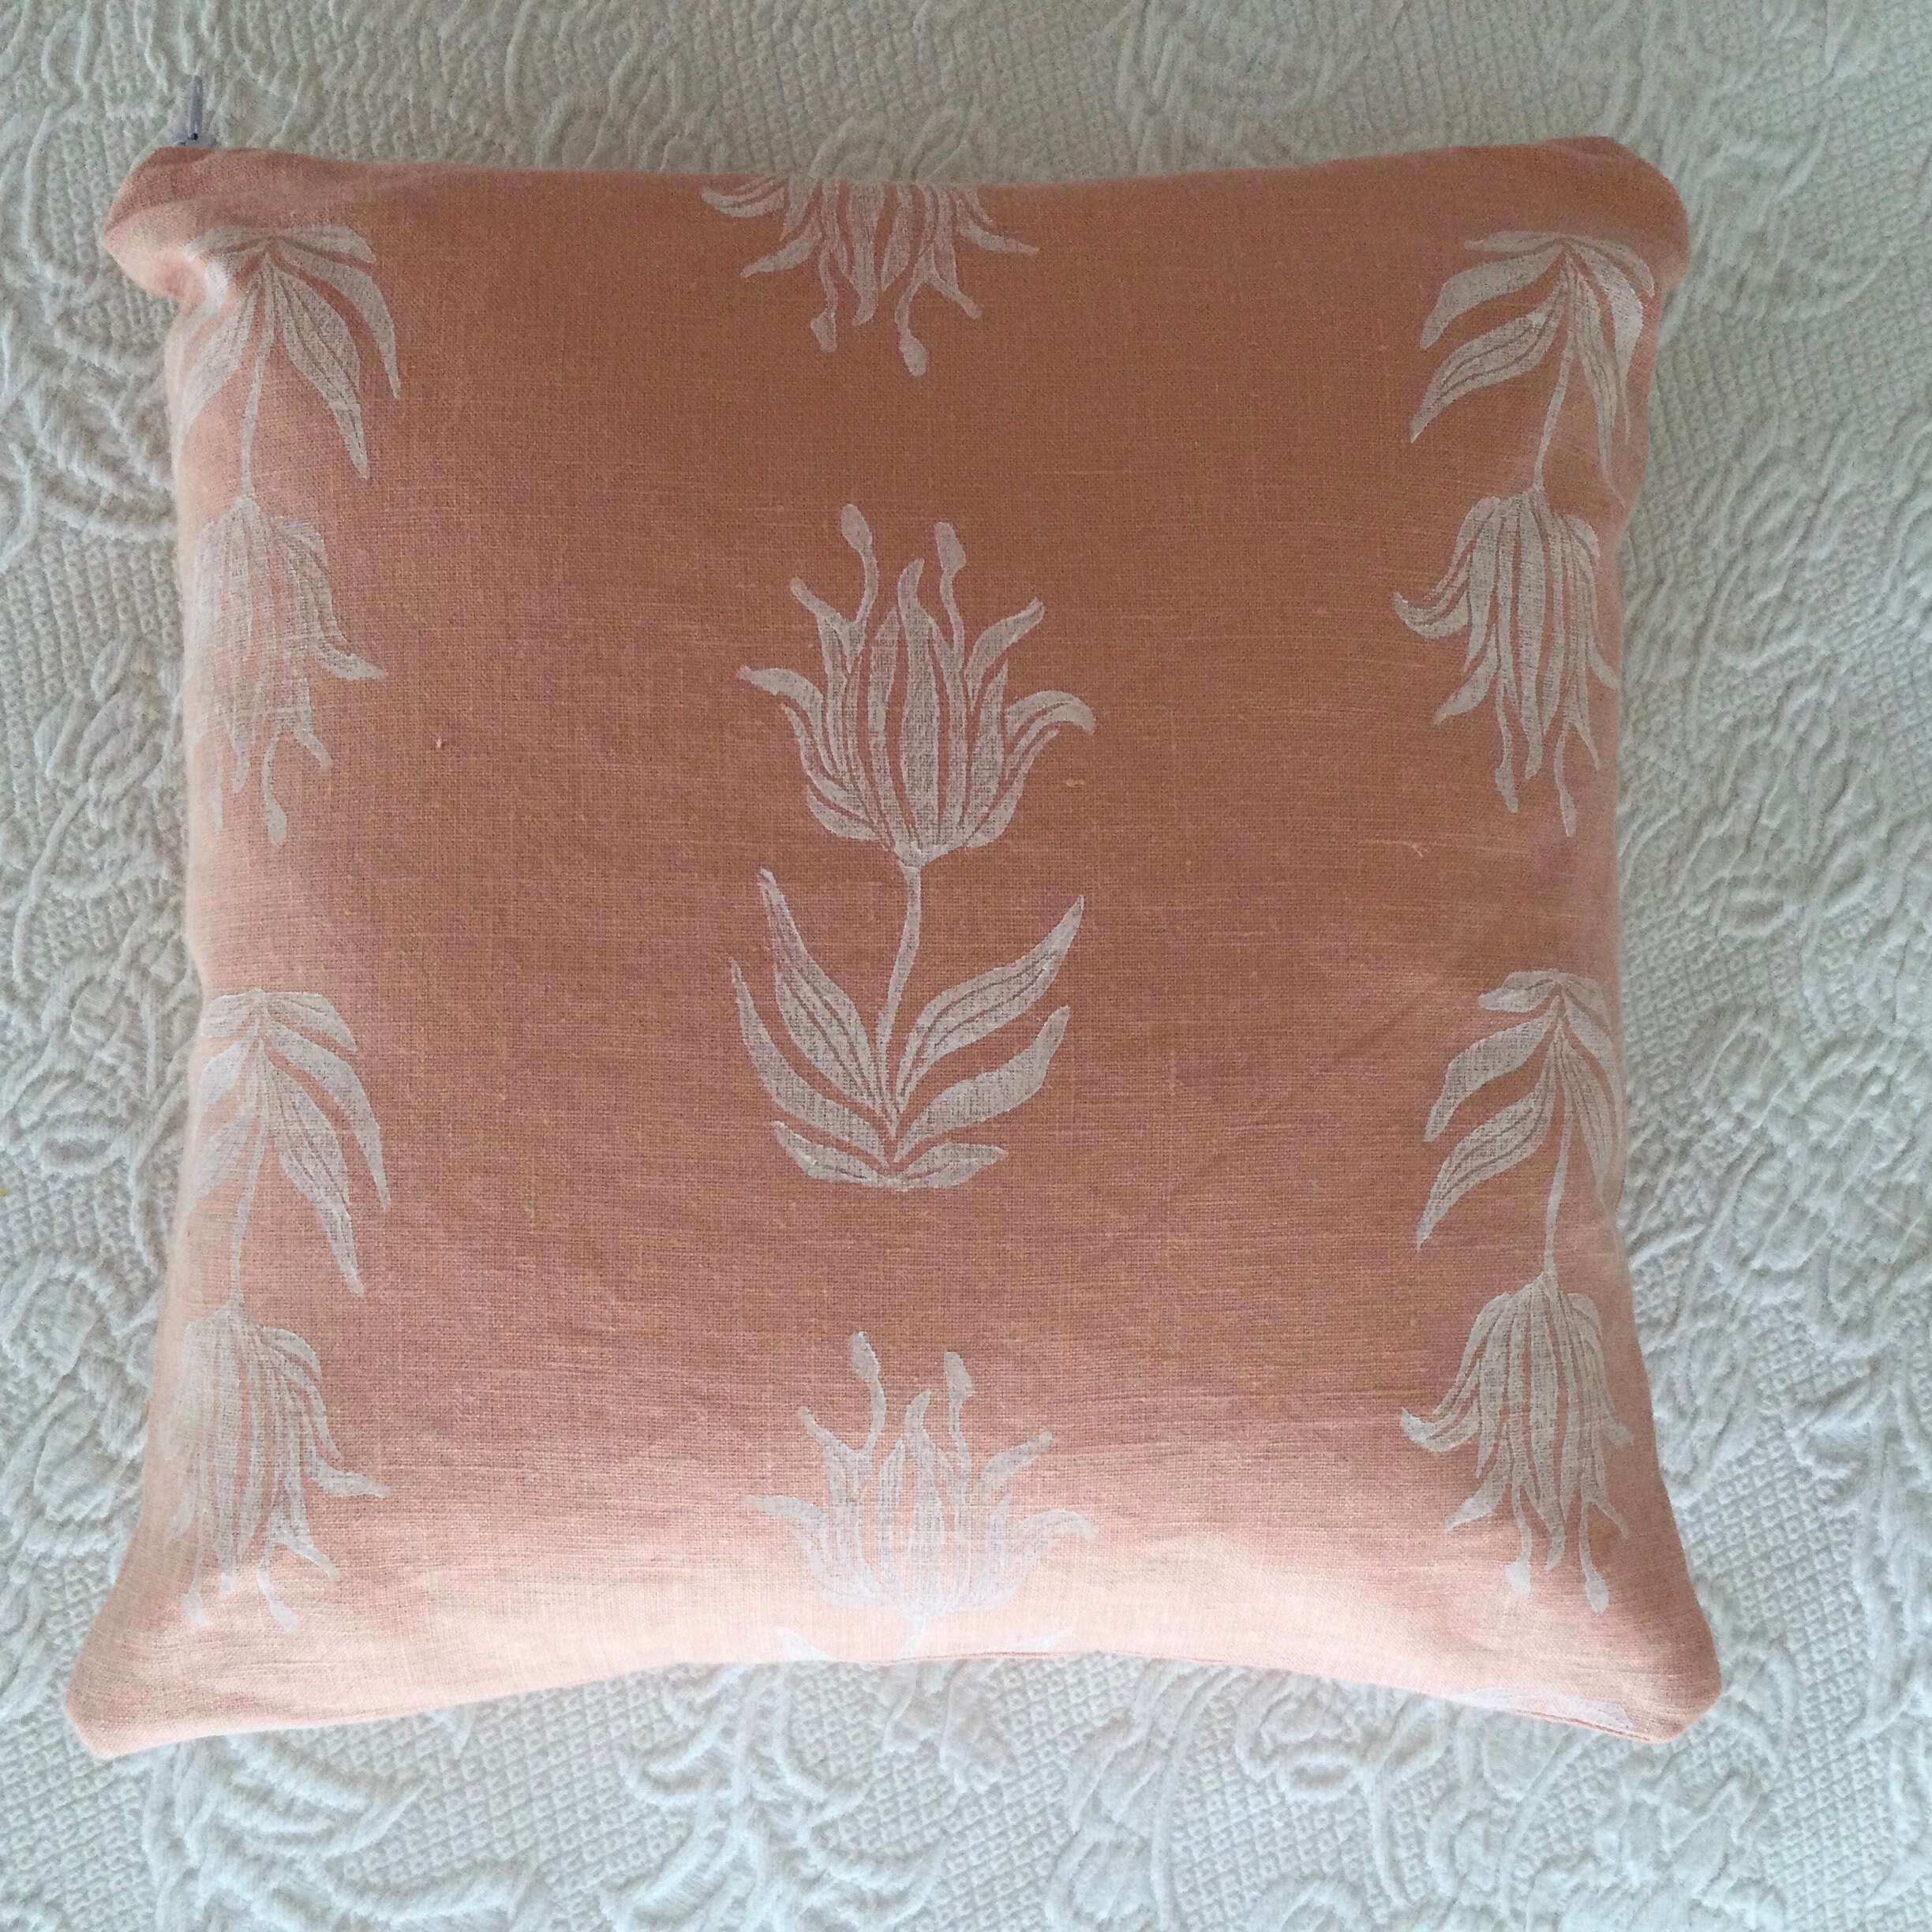 New sealed Nautica savannah standard pillow sham quilted pink brown cover